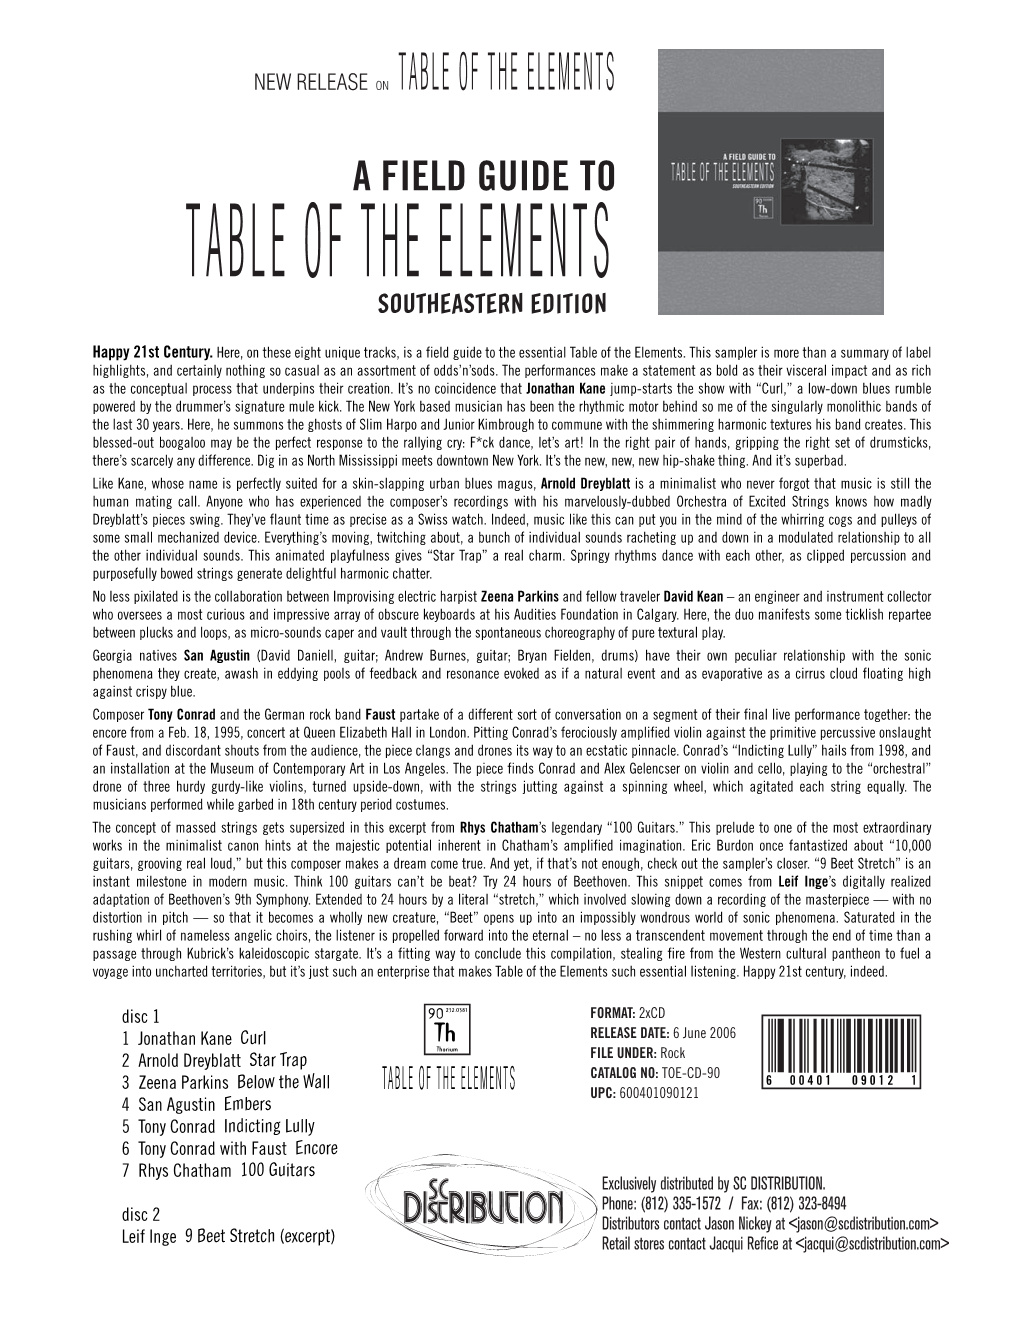 Table of the Elements Southeastern Edition